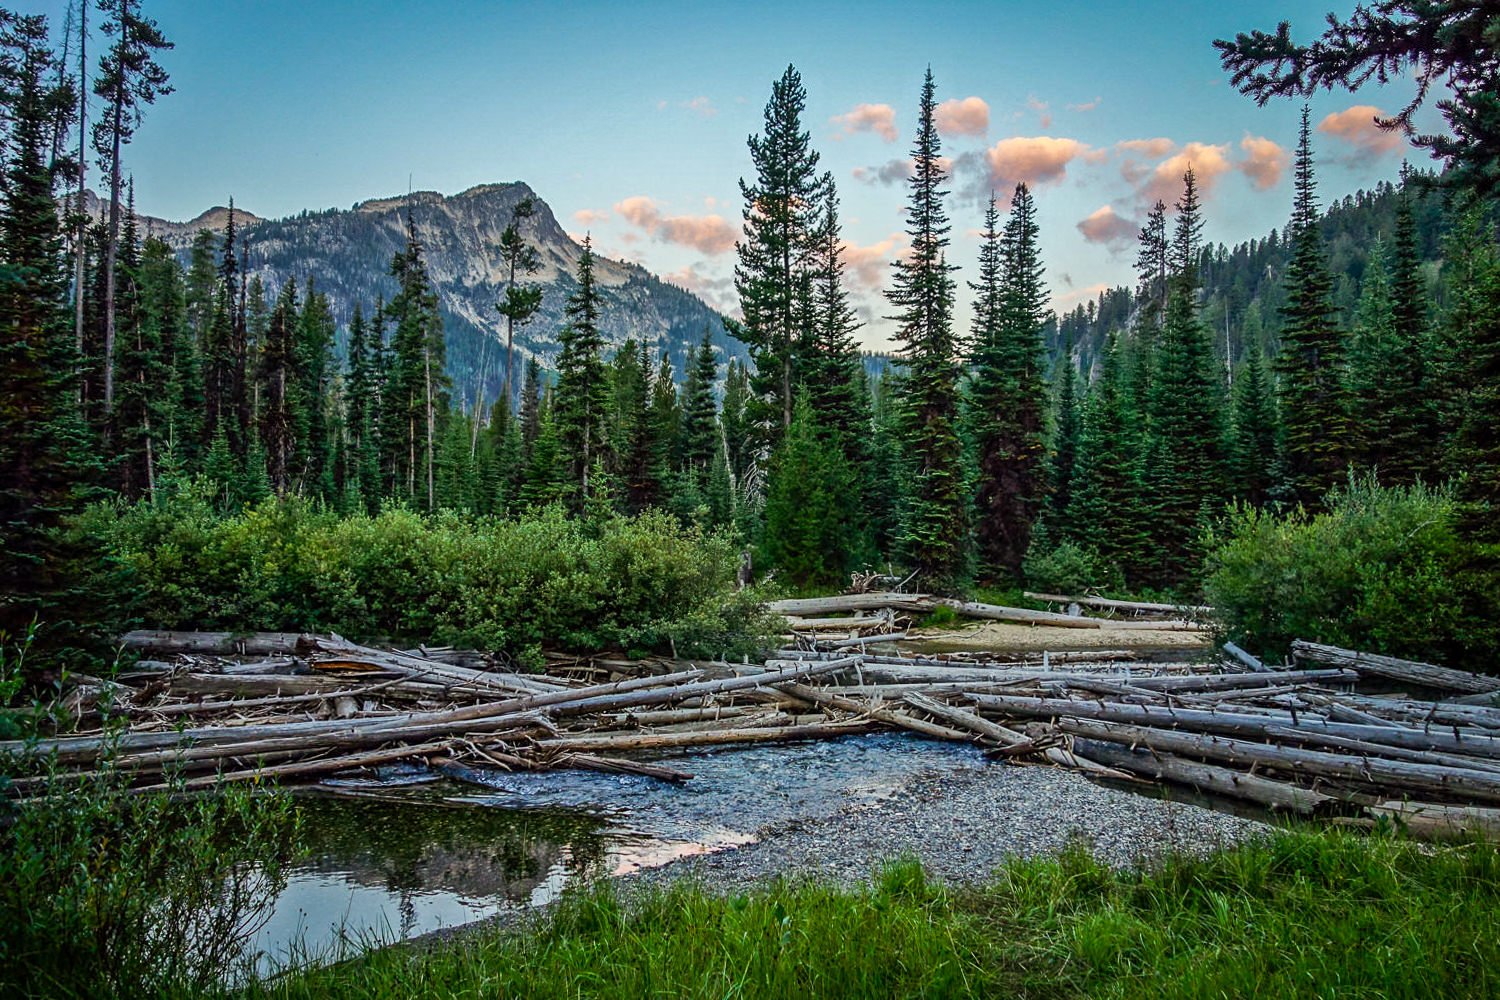 Logs jammed up along a creek in the Wallowa Mountains.